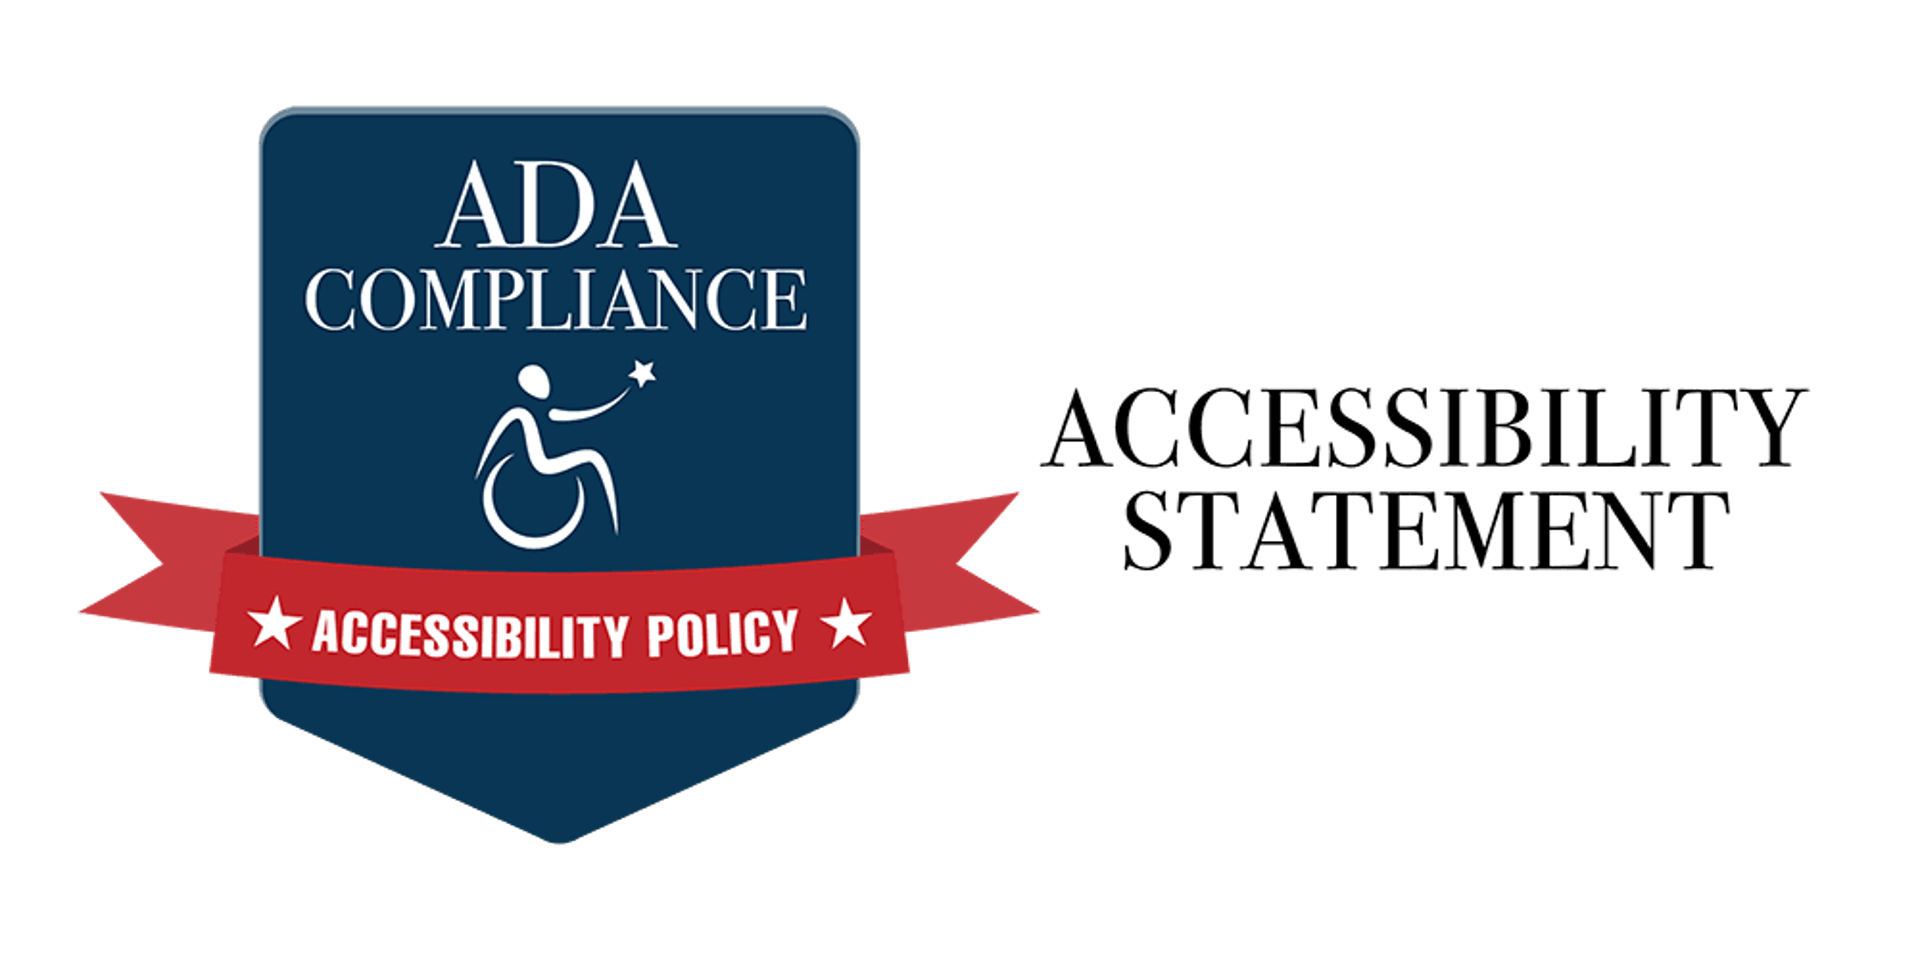 ADA Compliance Accessibility Statement